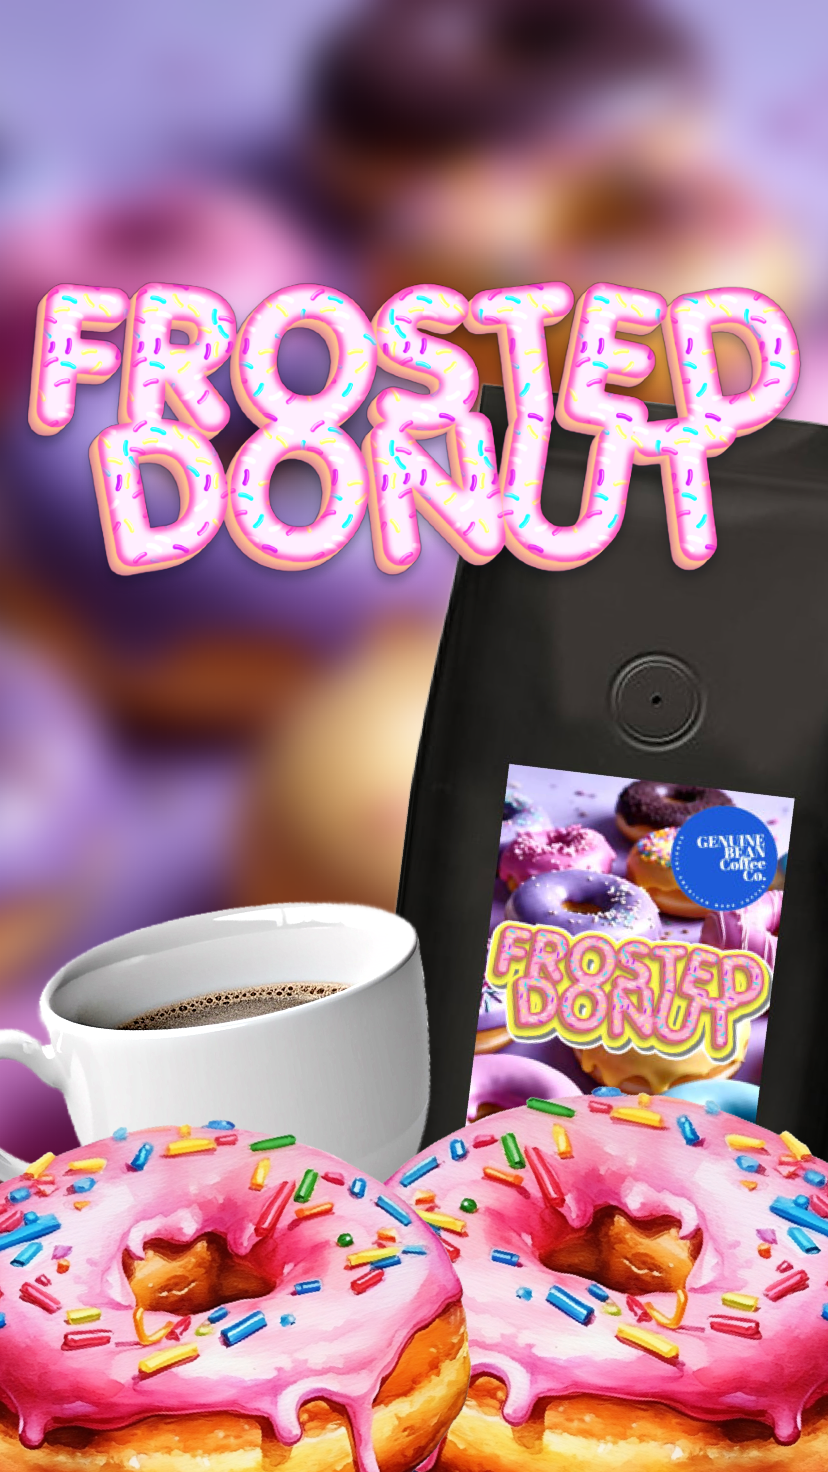 FROSTED DONUT